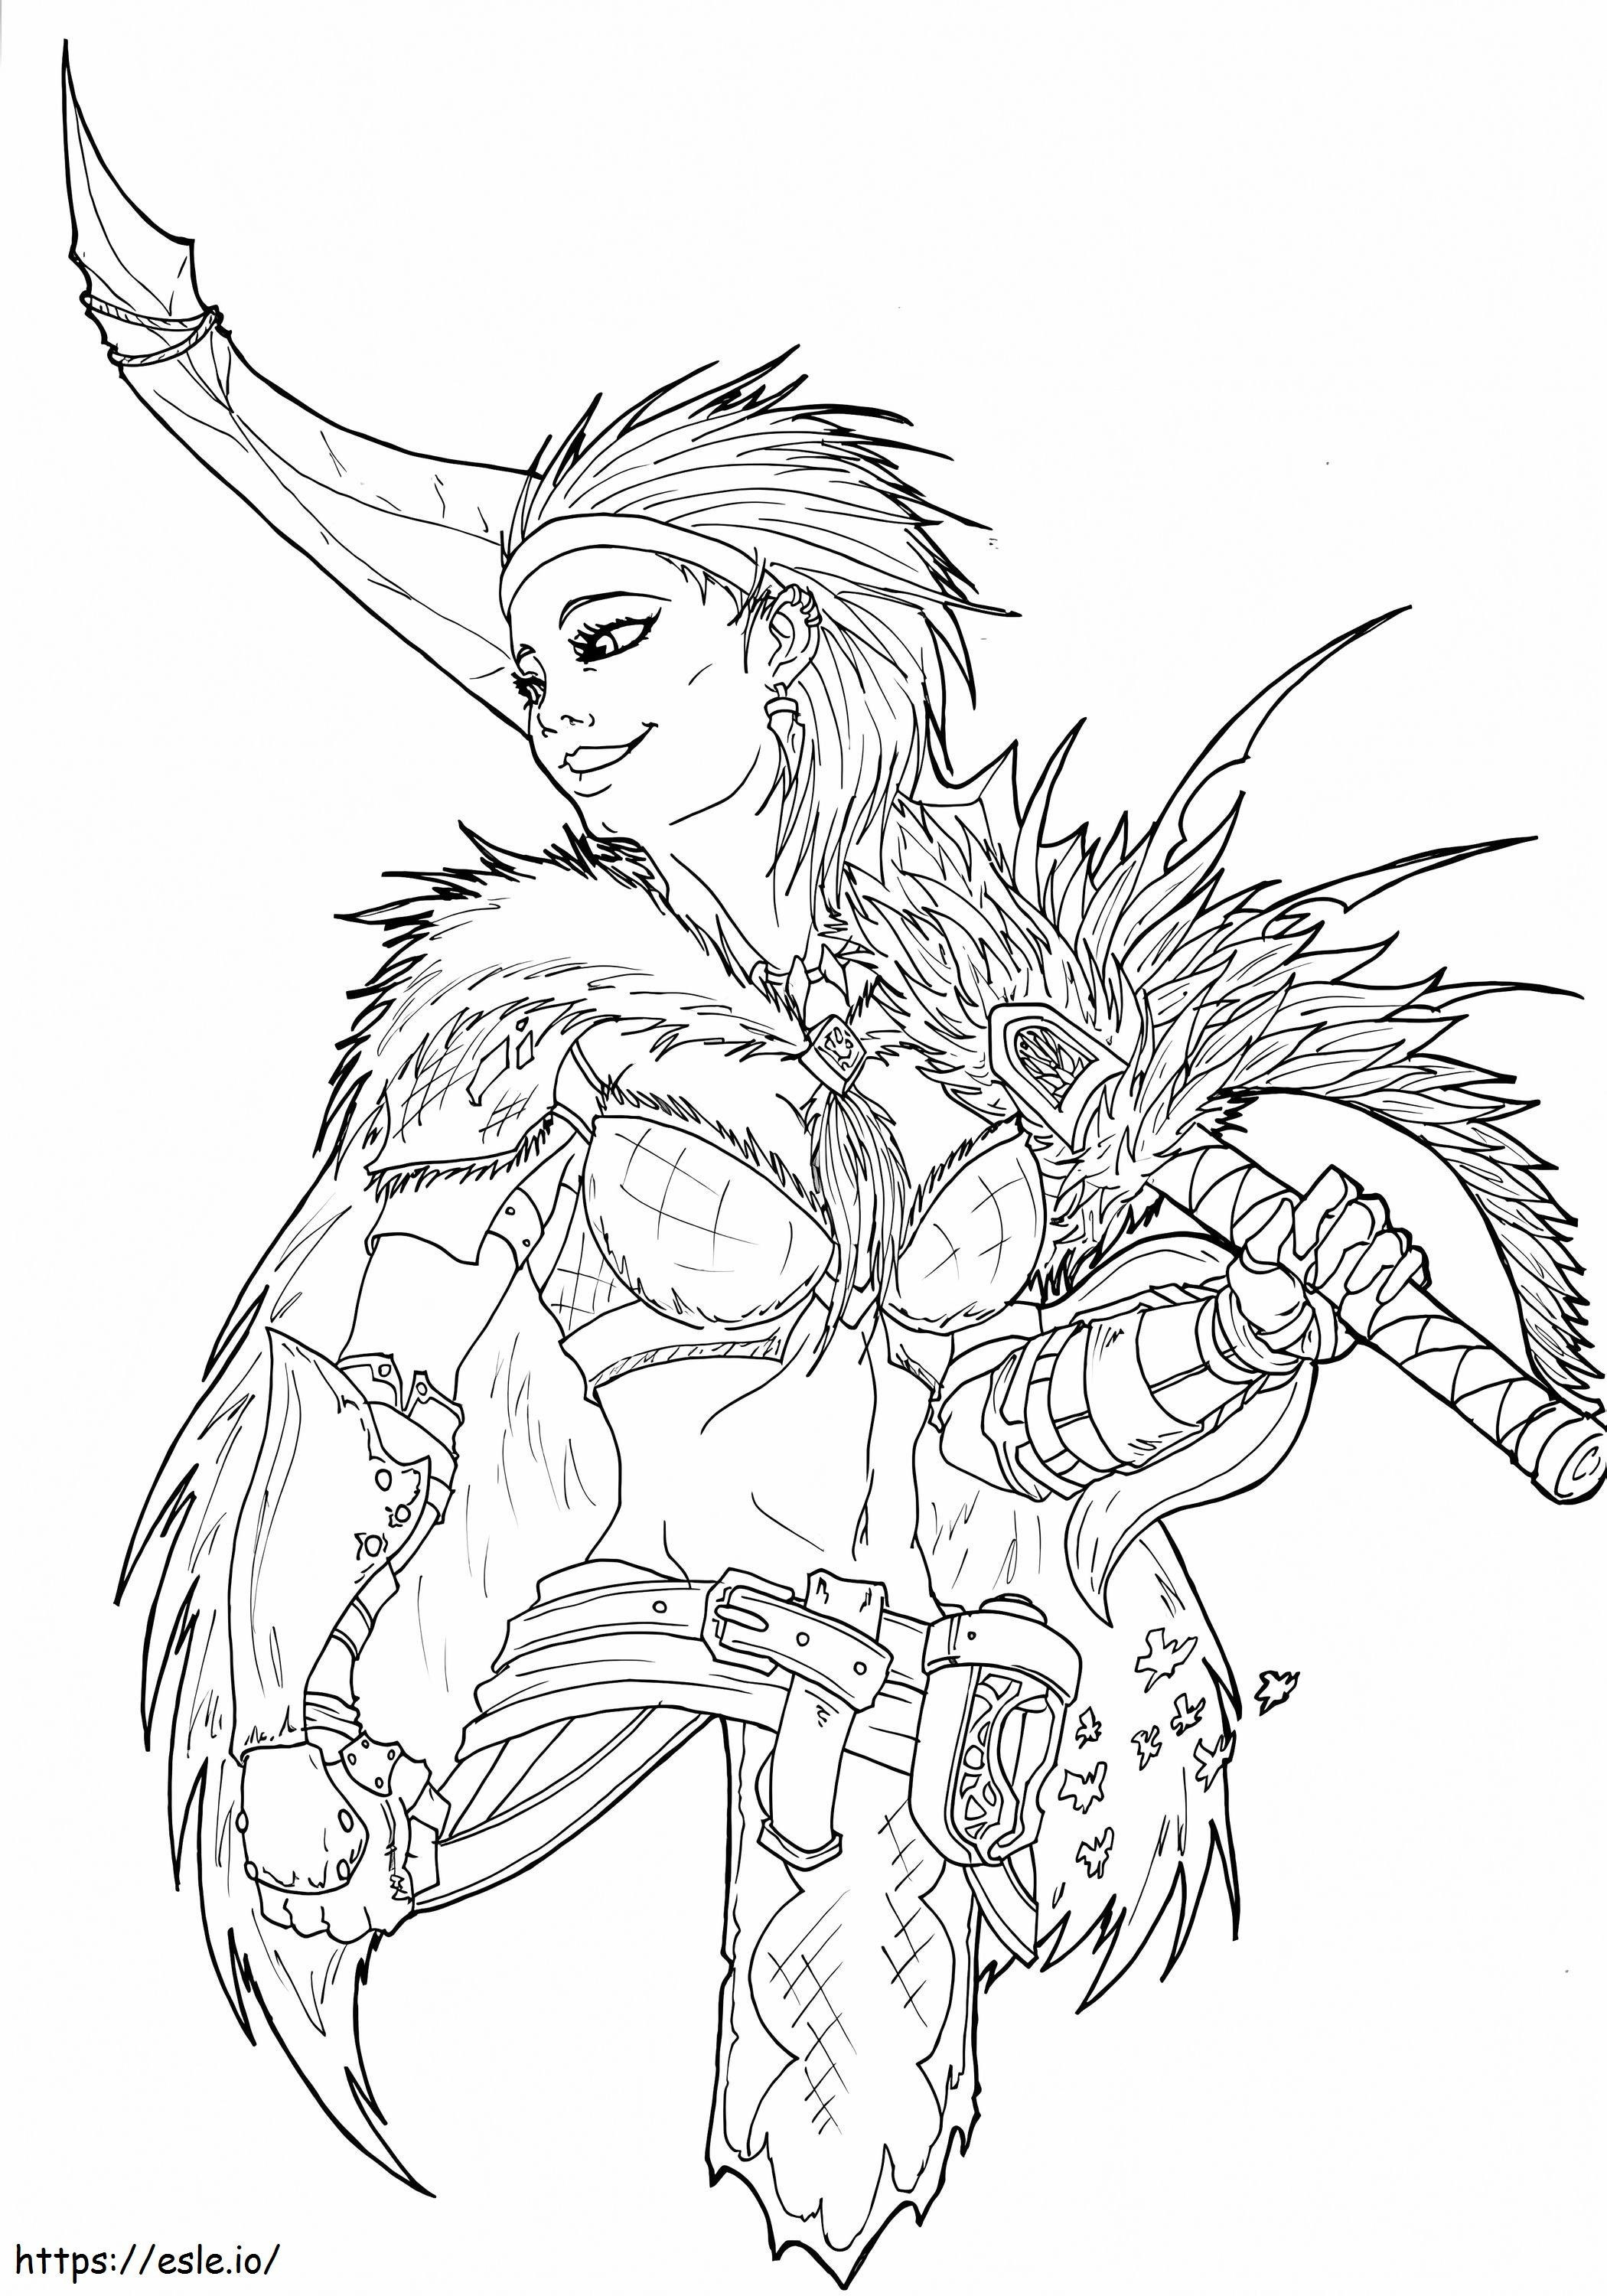 Character Monster Hunter coloring page